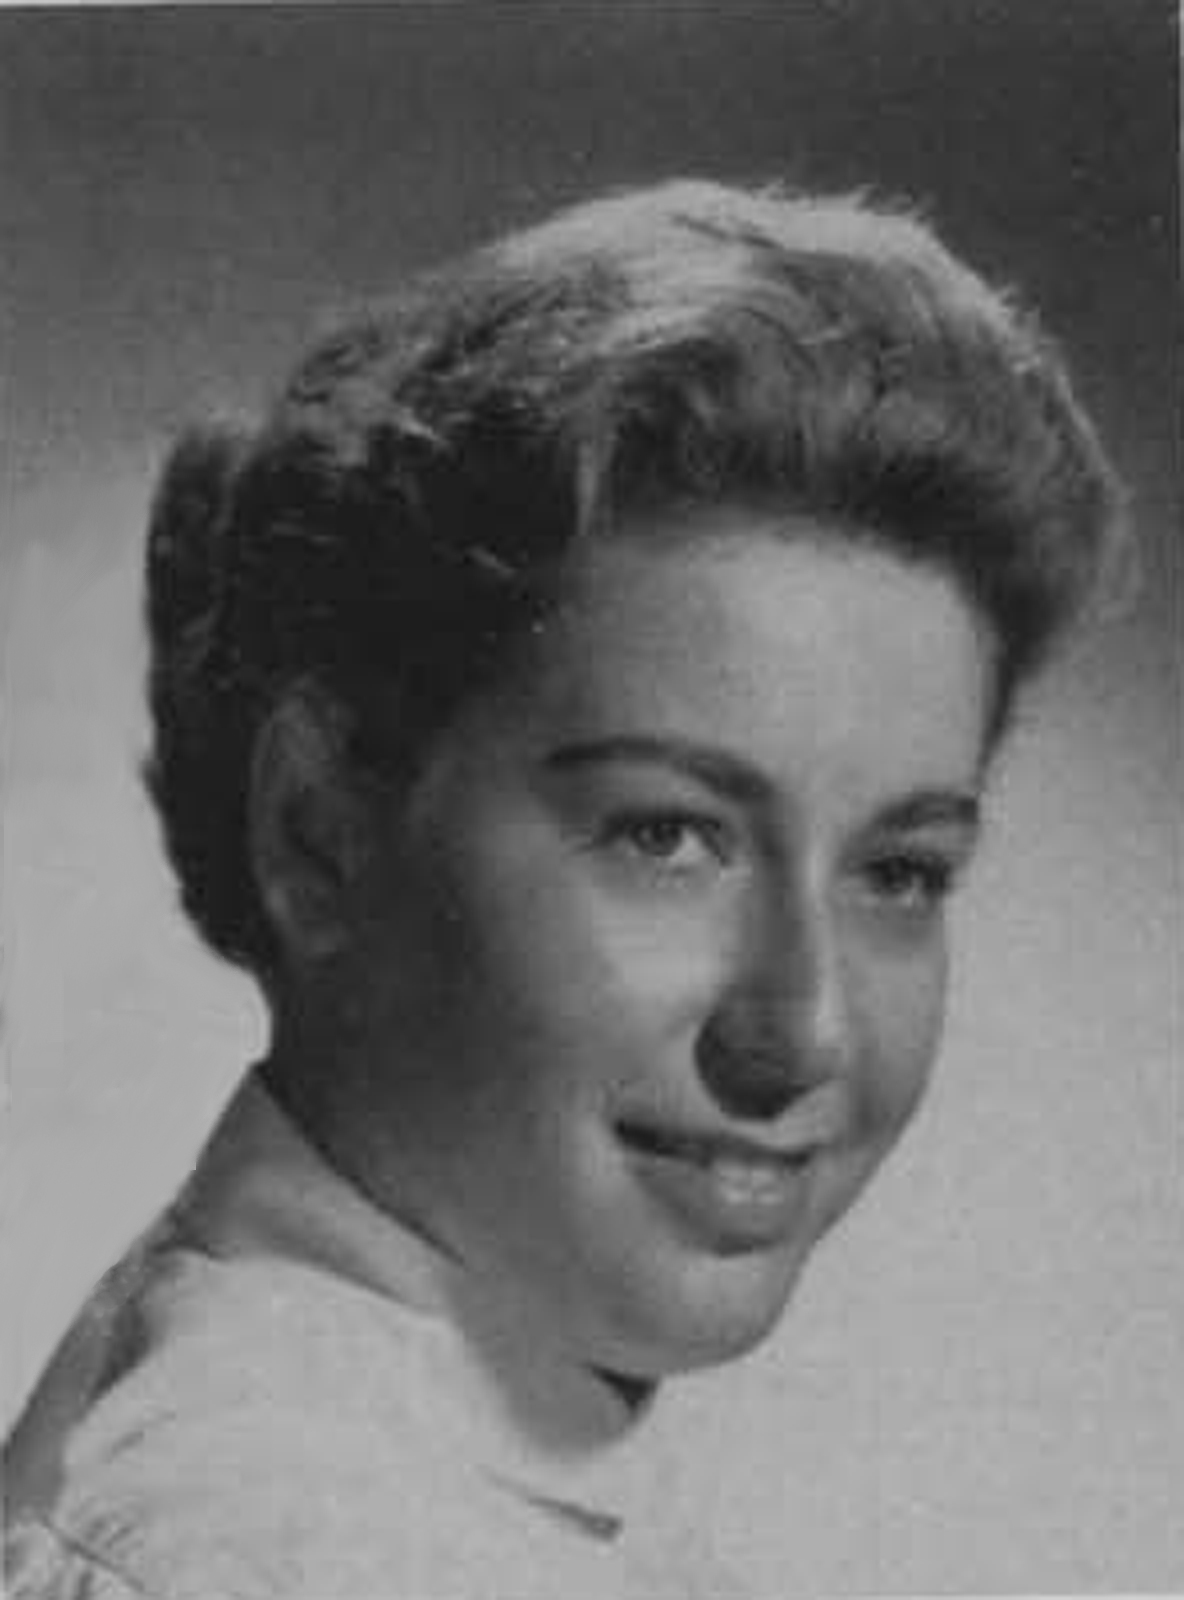 1959 Yearbook